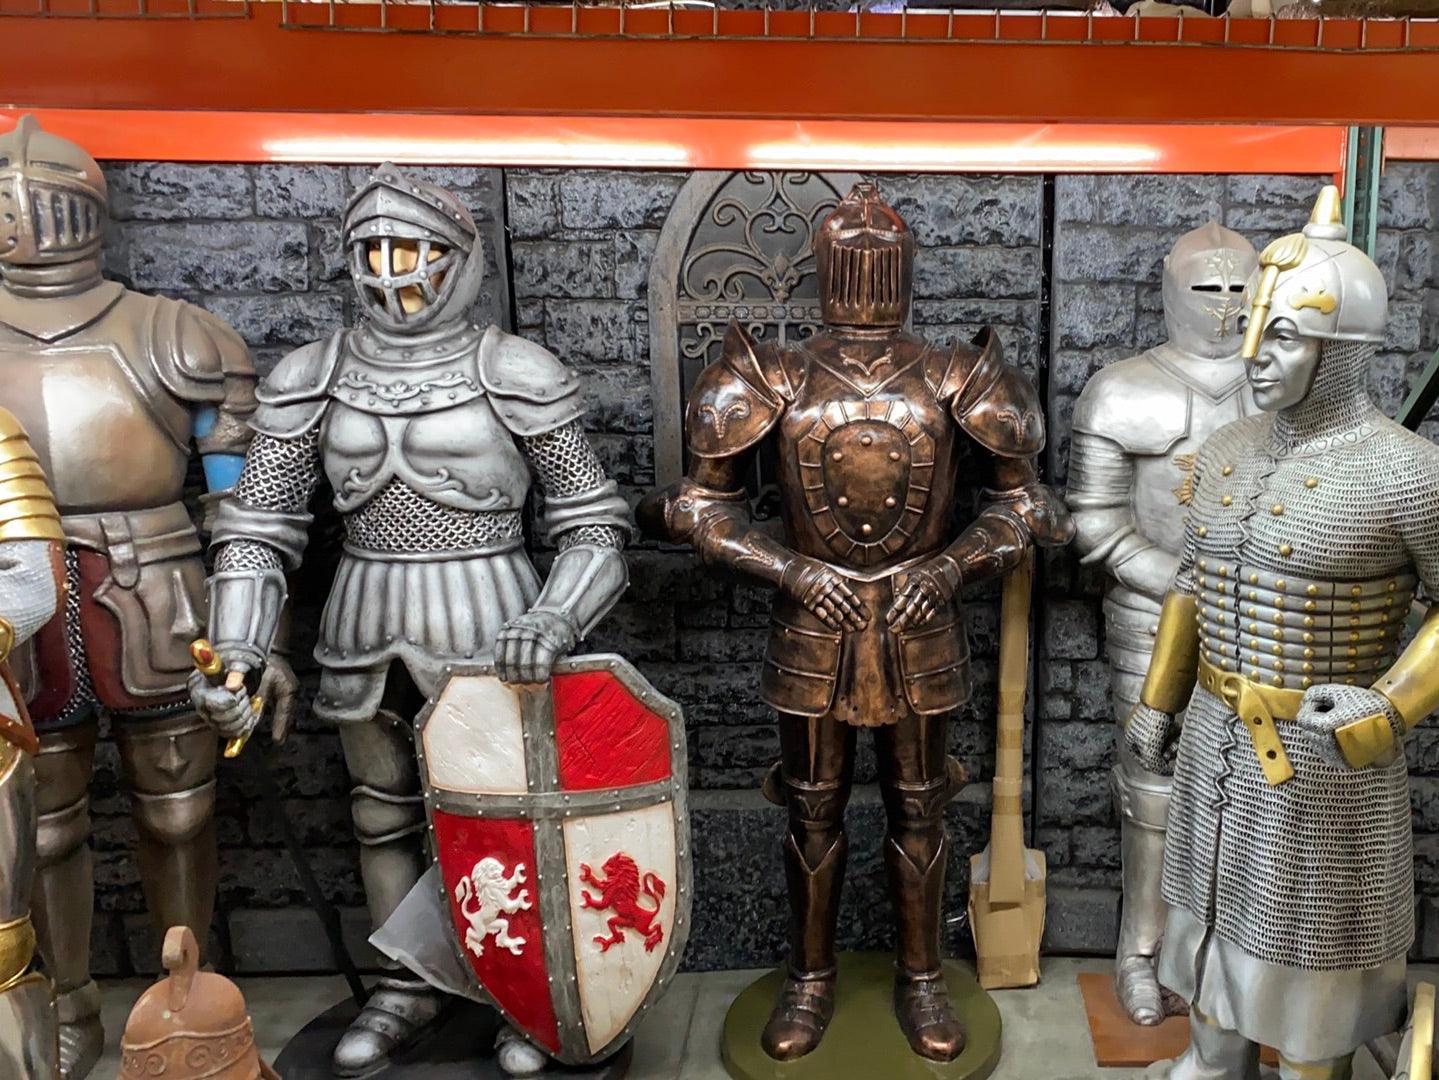 Mysterious Knight Life Size Statue